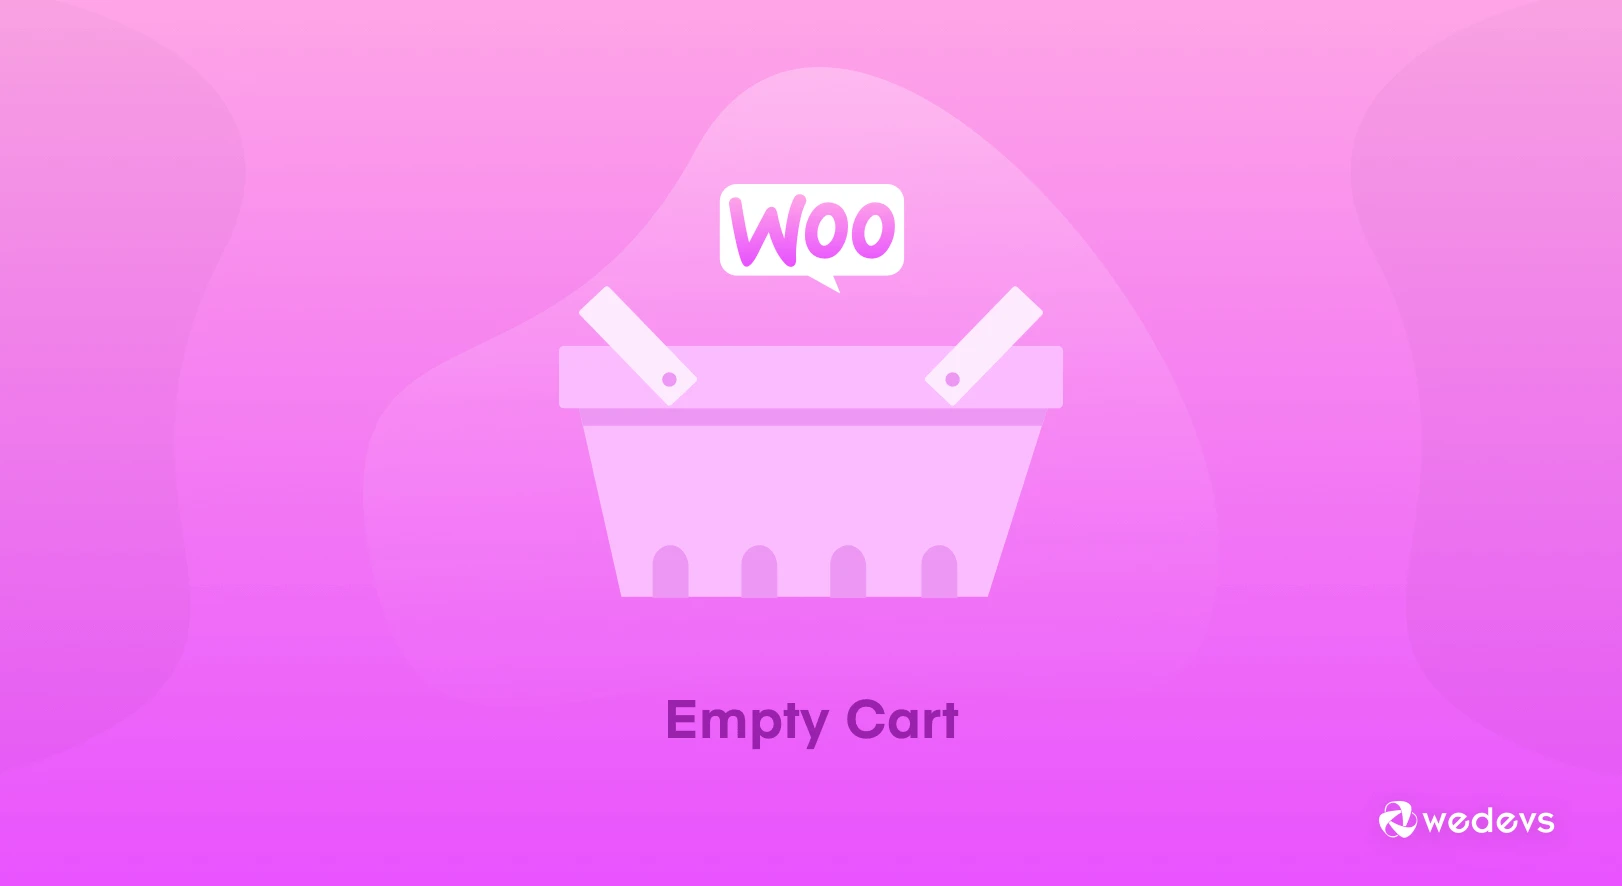 How to Deal with WooCommerce Empty Cart Issues (10 Possible Solutions)